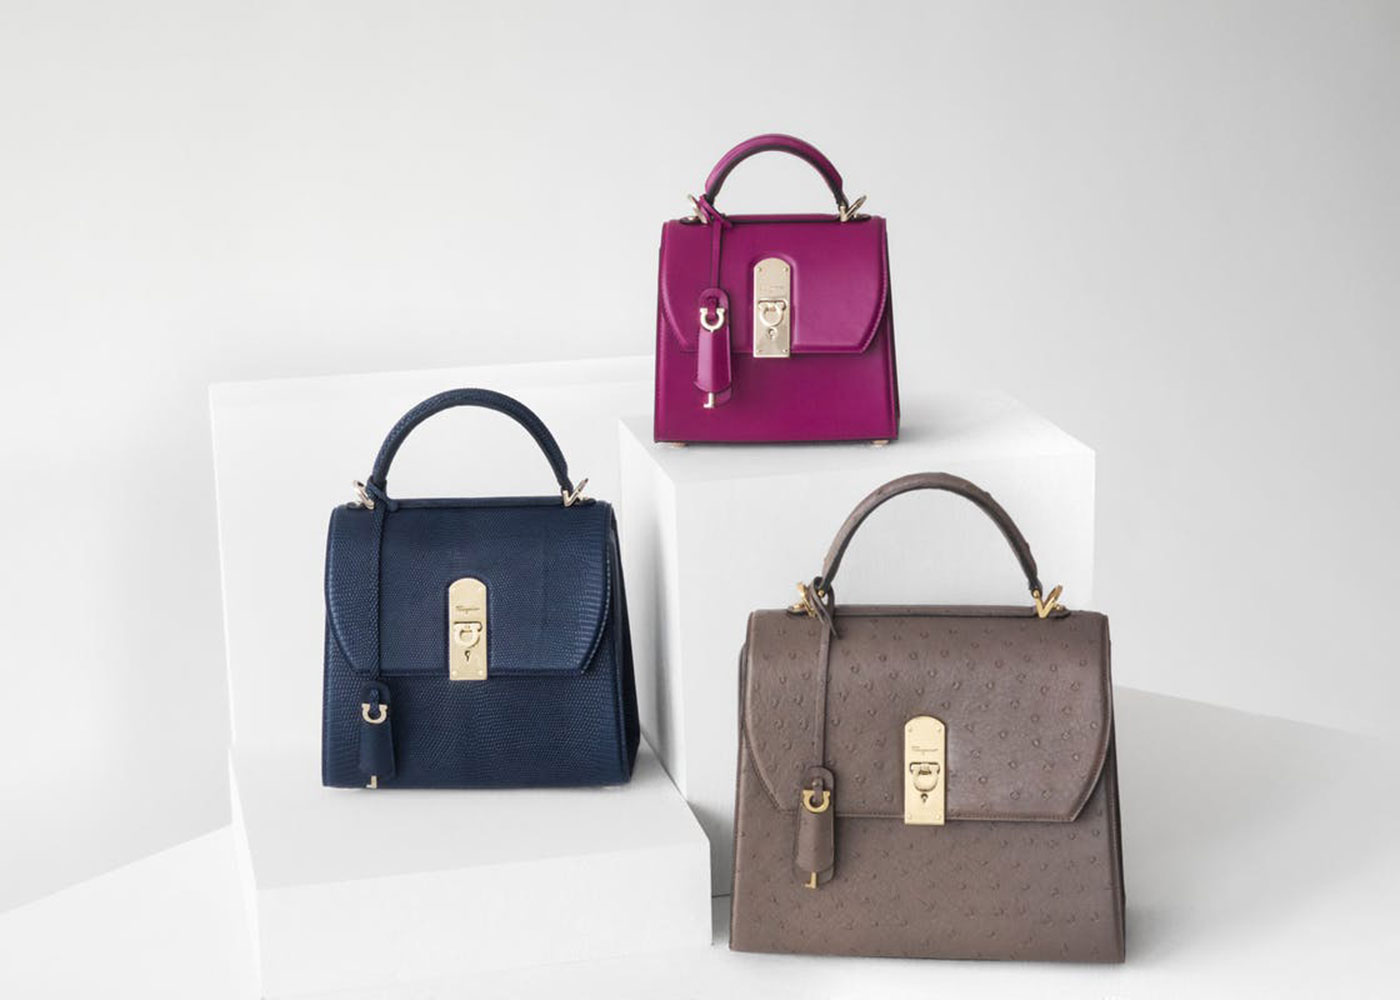 7 things we love about the new Salvatore Ferragamo Boxyz bag collection